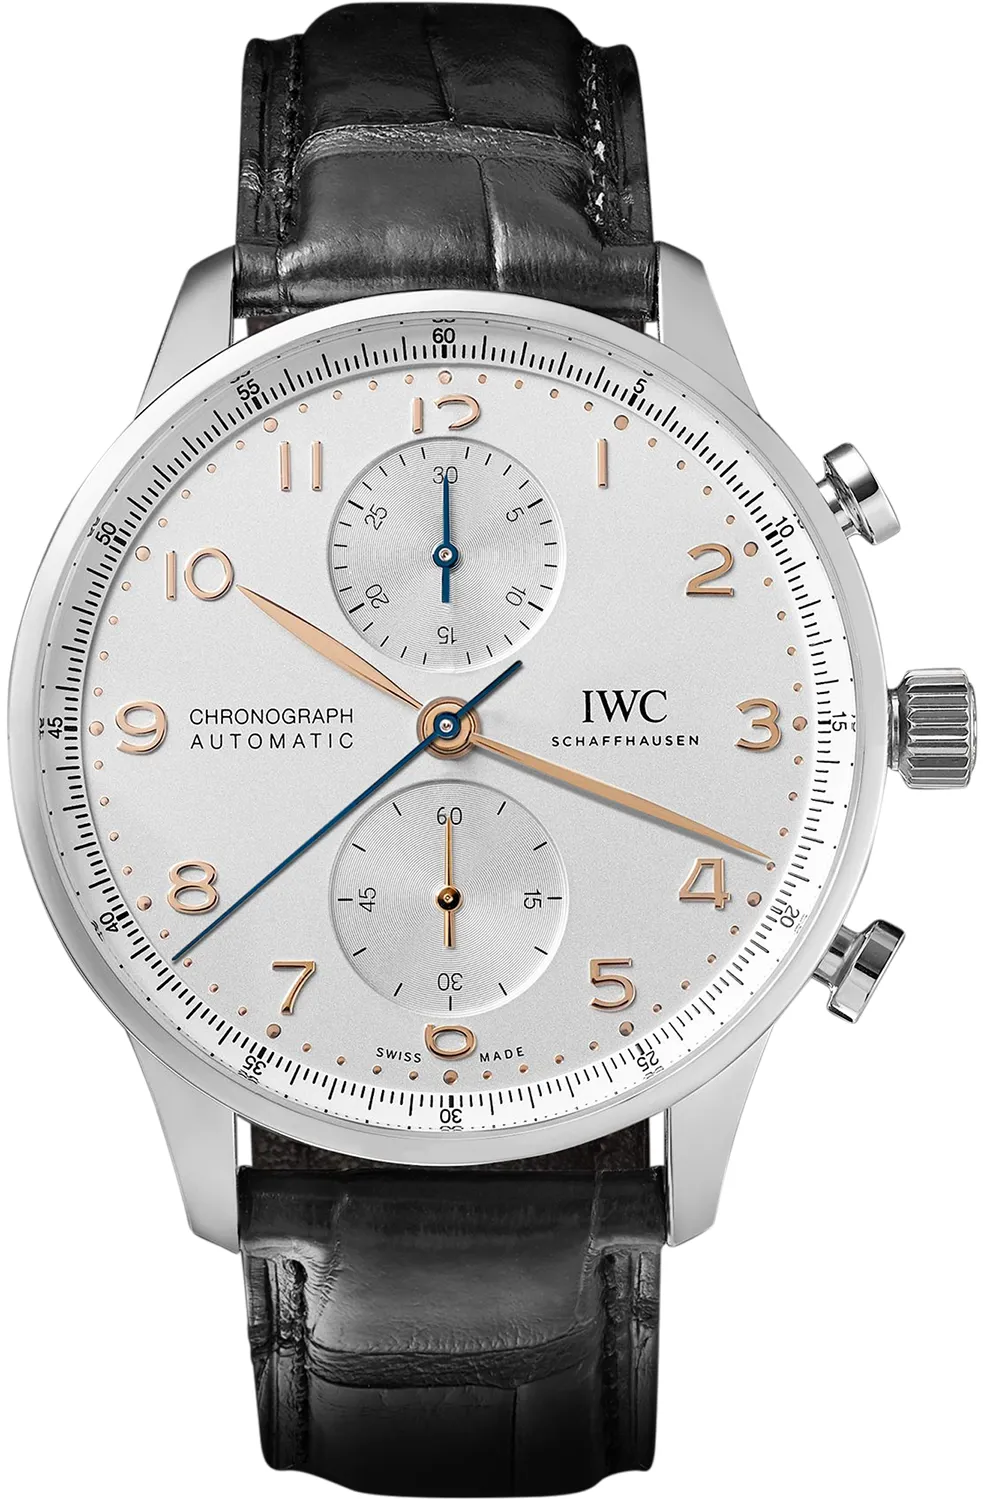 IWC Portugieser Chronograph IW371604 40mm Stainless steel